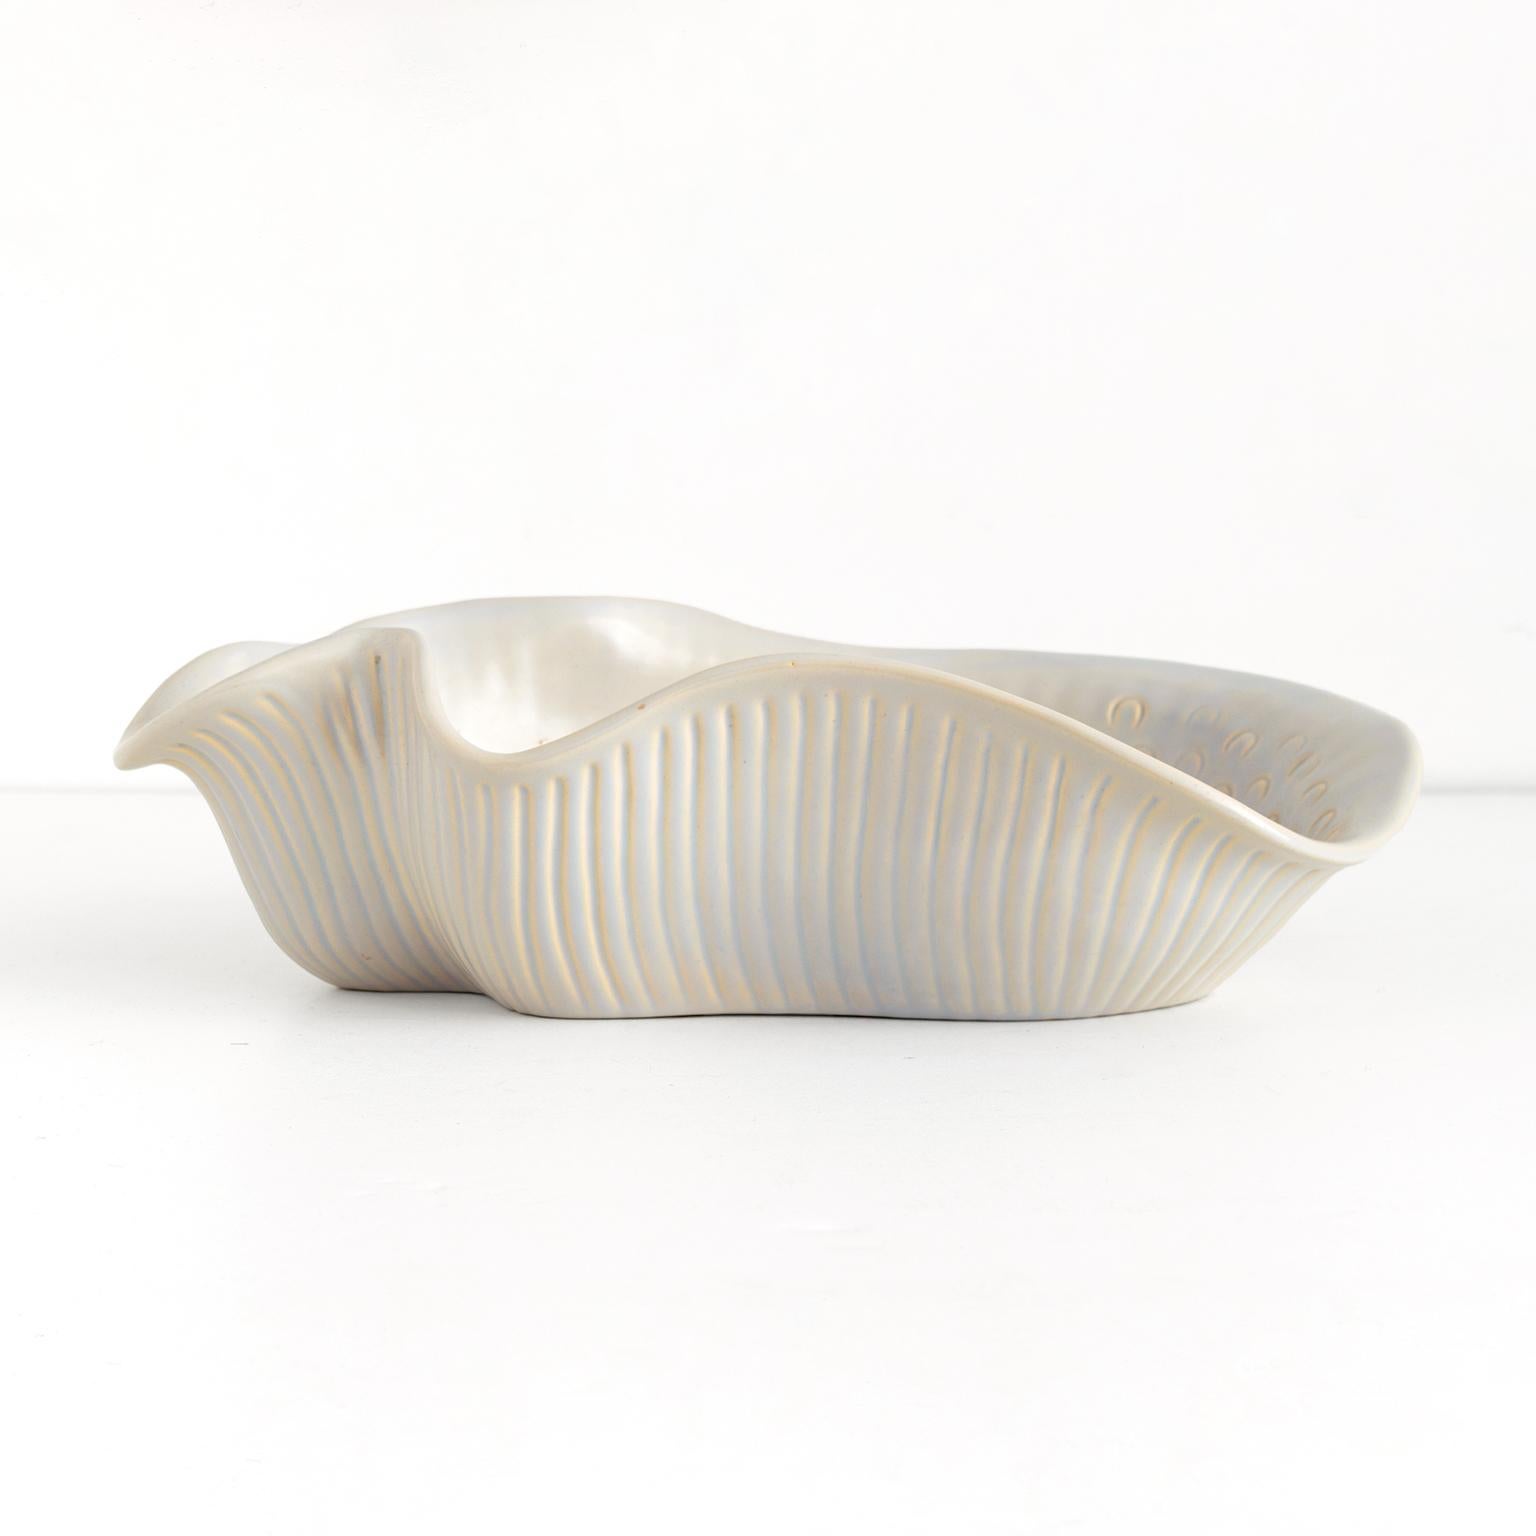 Scandinavian modern ceramic bowl in the form of a seashell in pale neutral colors. Designed by Ewald Dahlskog for Bo Fajans, Sweden, circa 1930’s. 

Measures: Length: 13.5“ width: 8.5“ height: 4“.